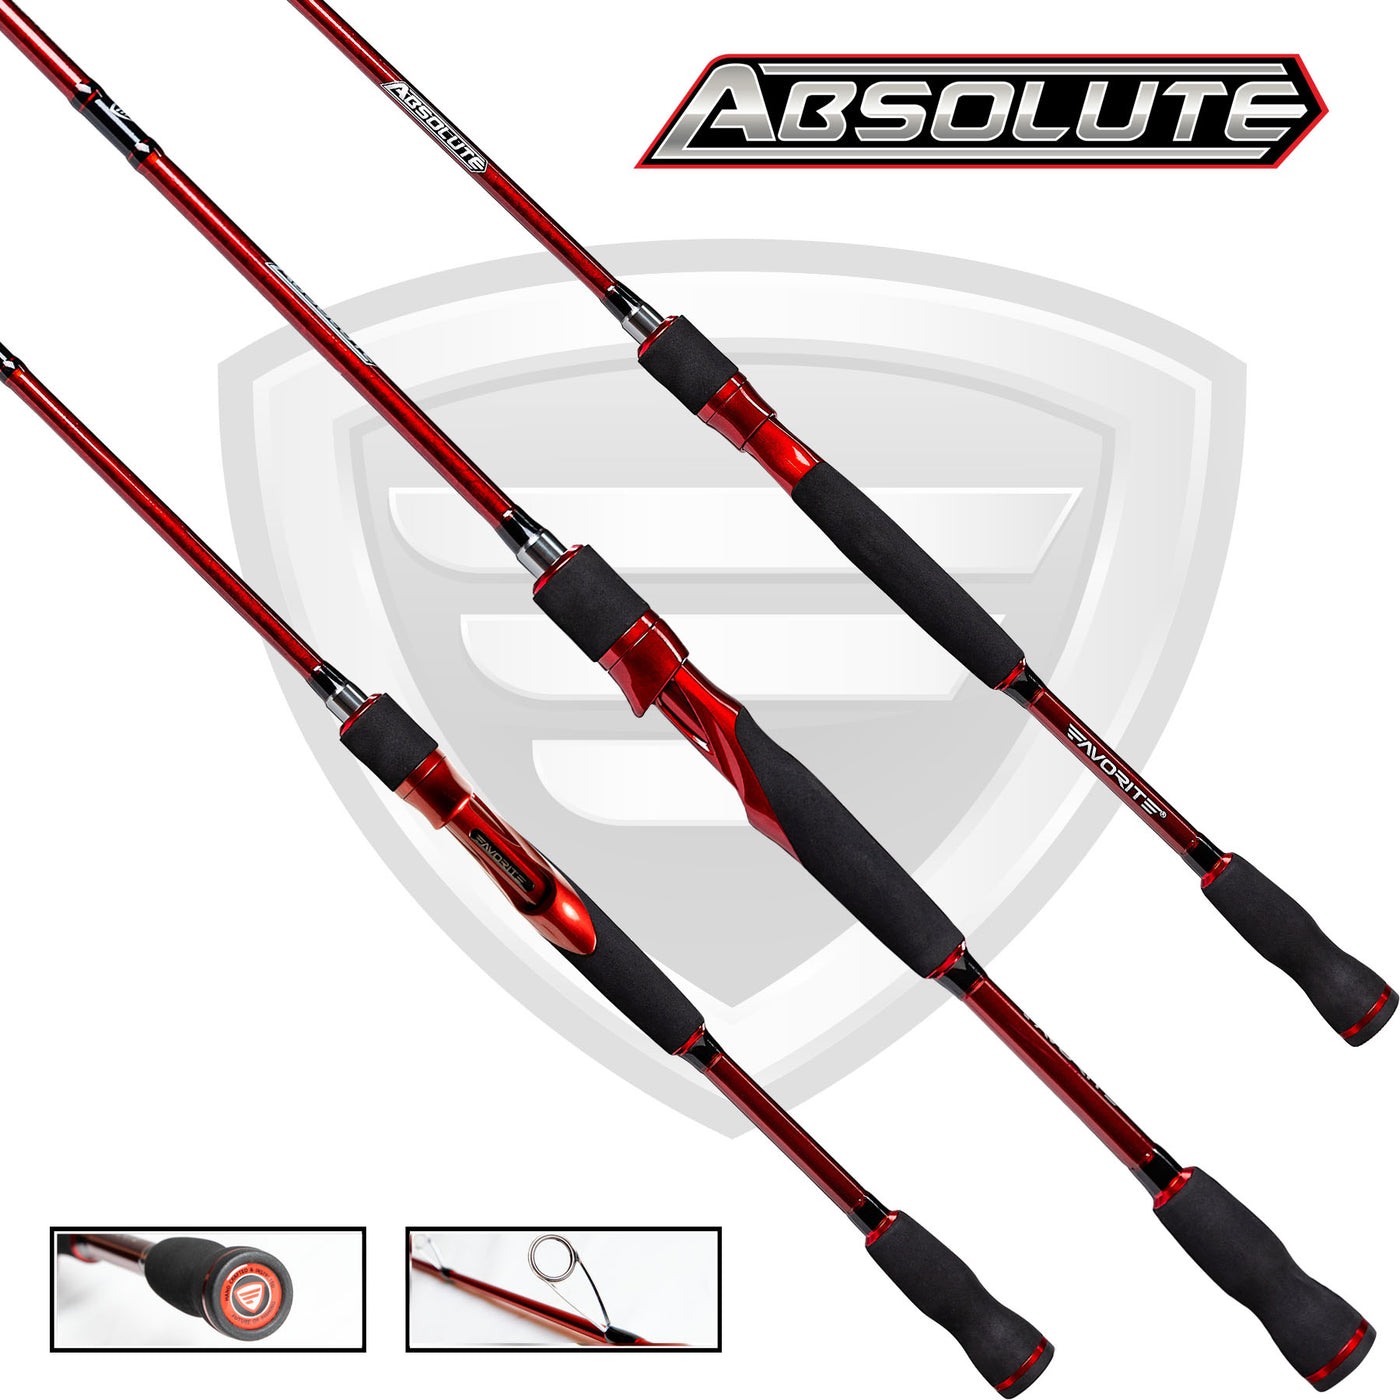 Absolute spinning rod